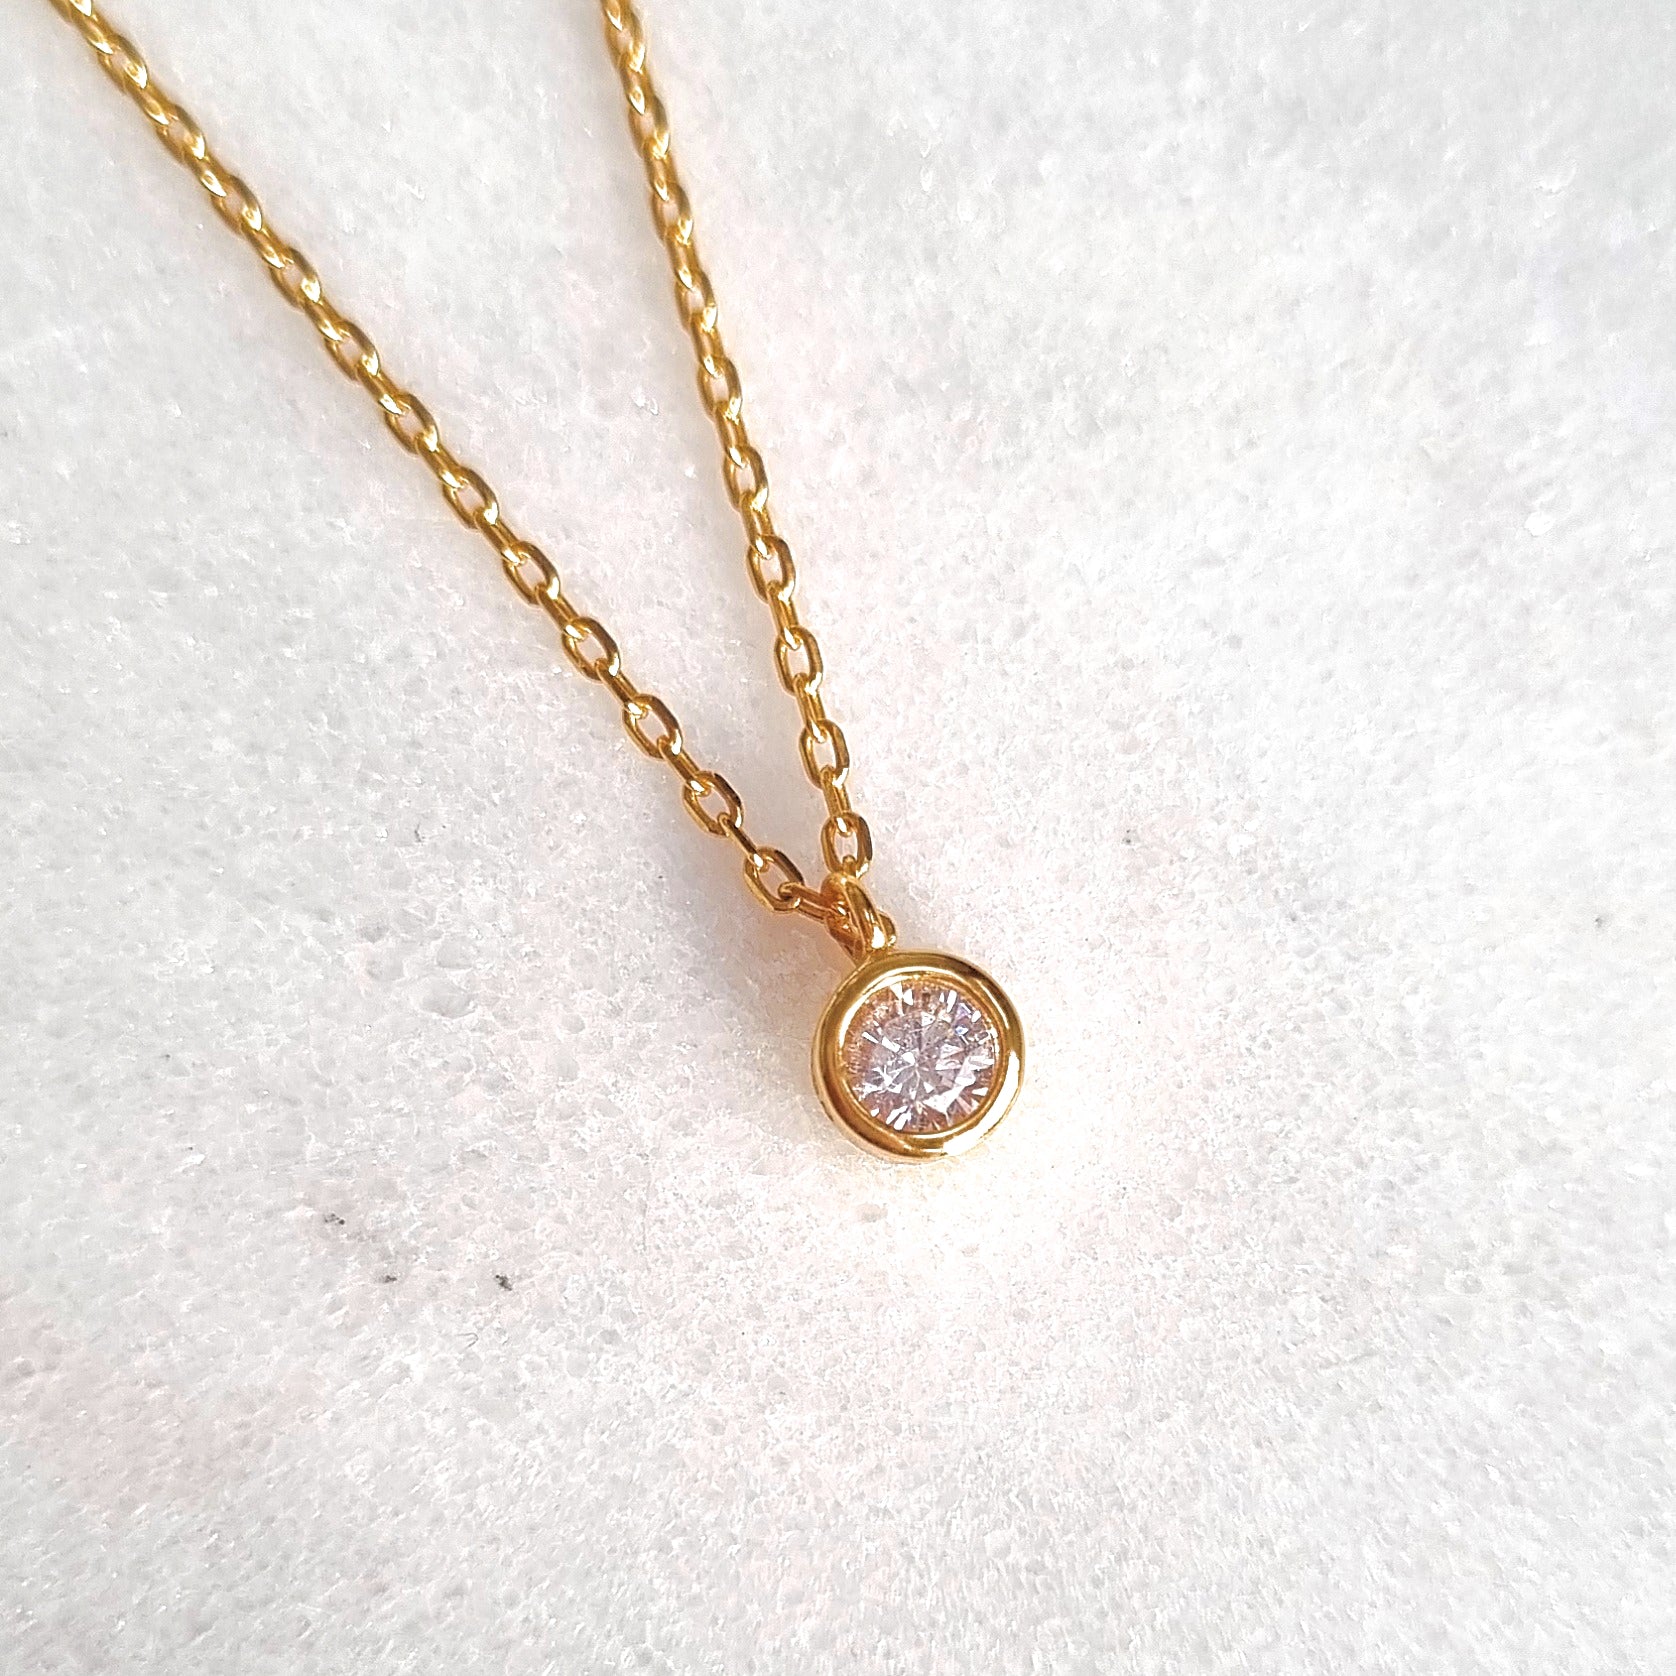 Starlight Solitaire Pendant Necklace in Gold